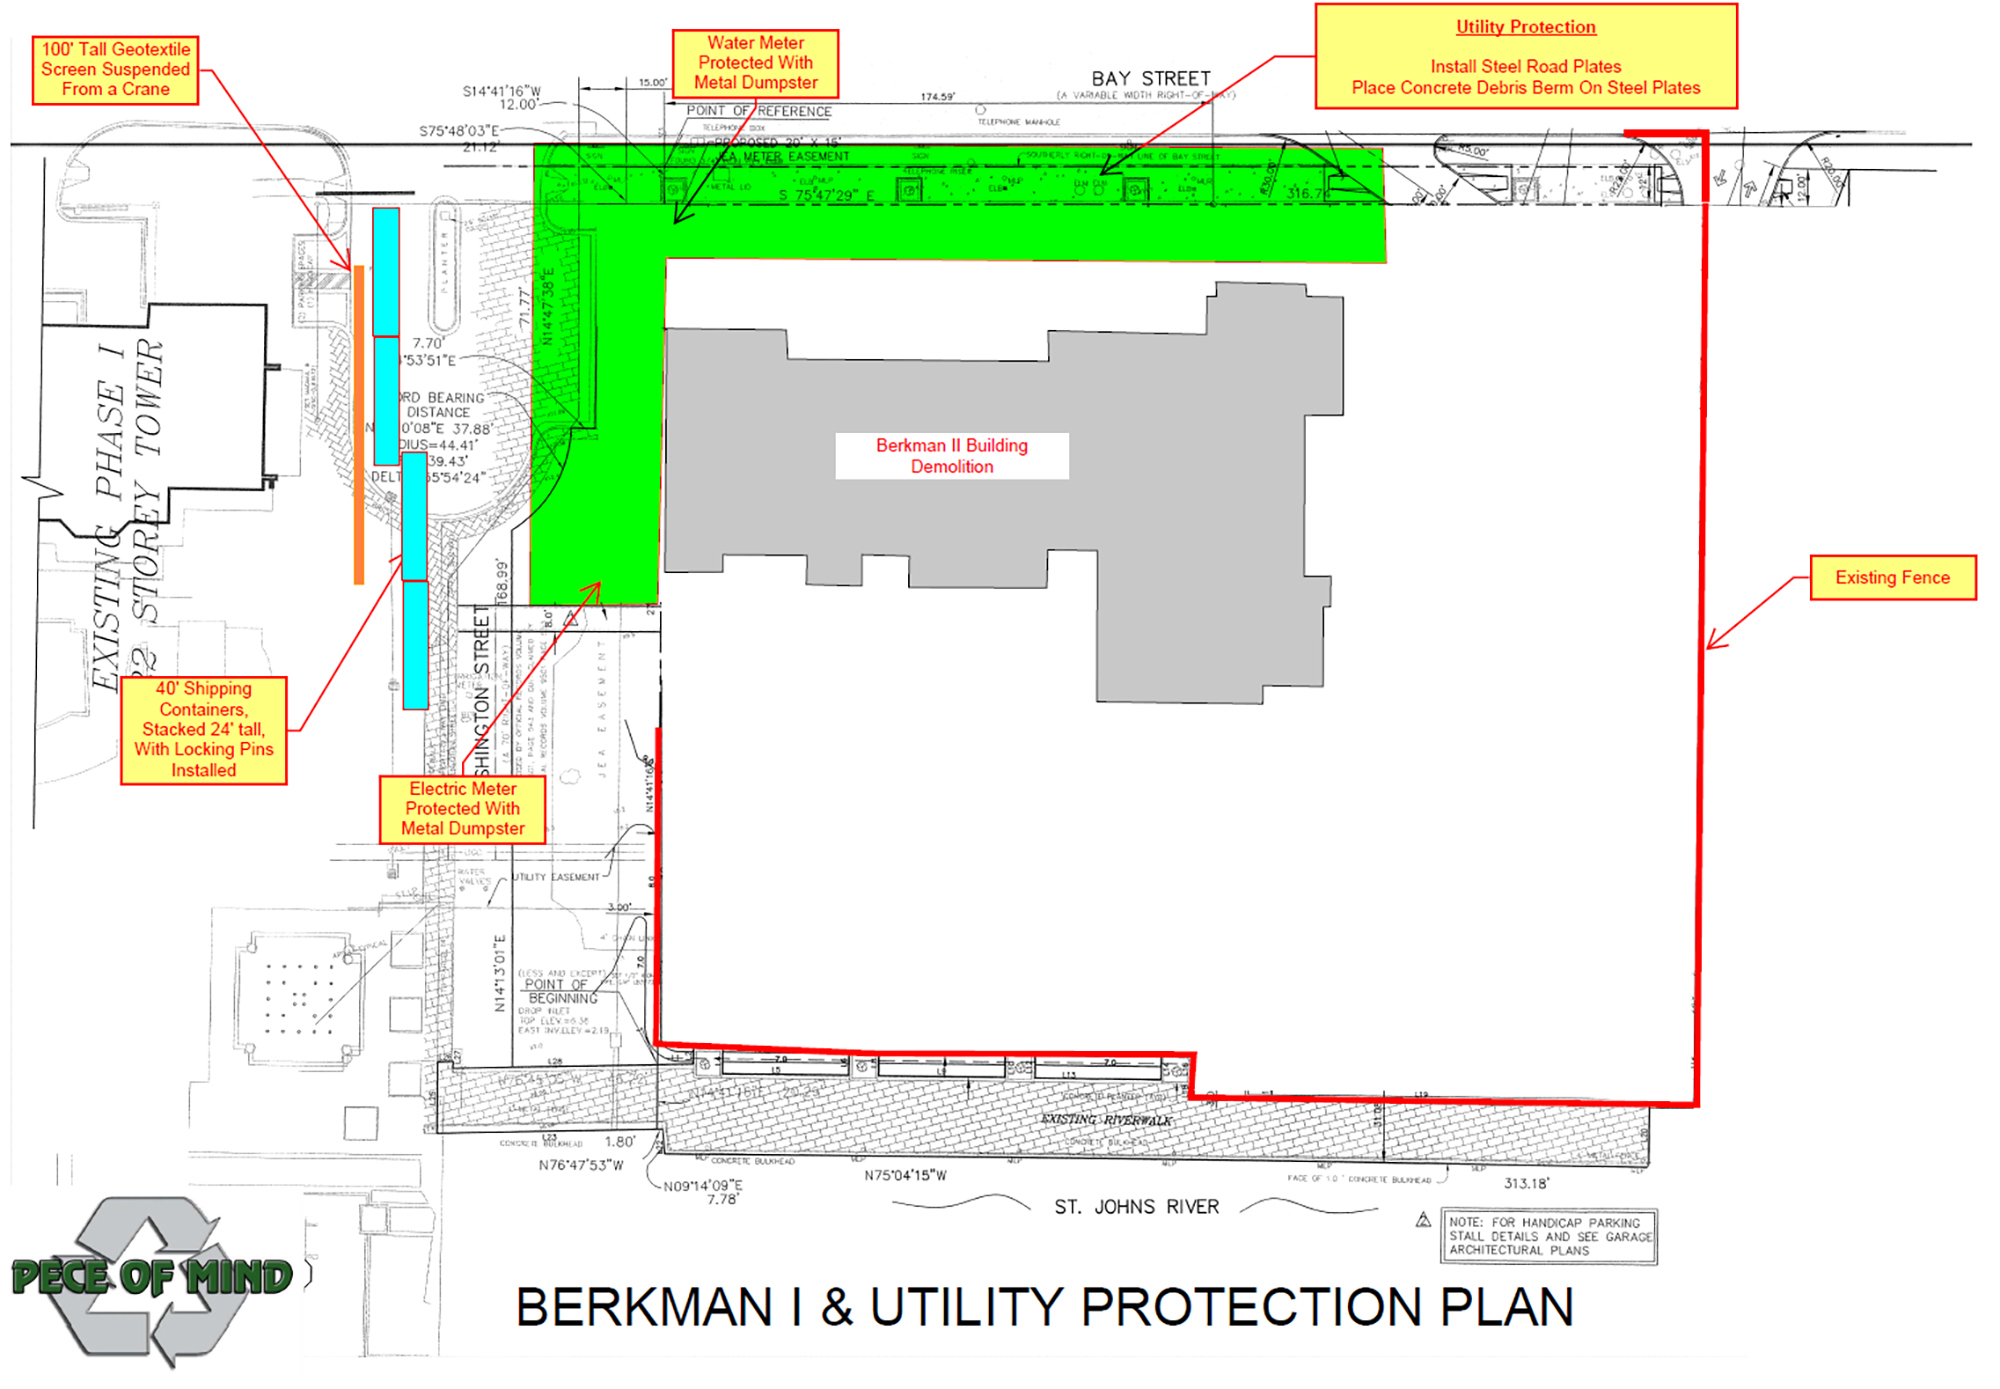 A map of the protection plan for The Plaza Condominium at Berkman Plaza and Marina. It was previously called the Berkman I.